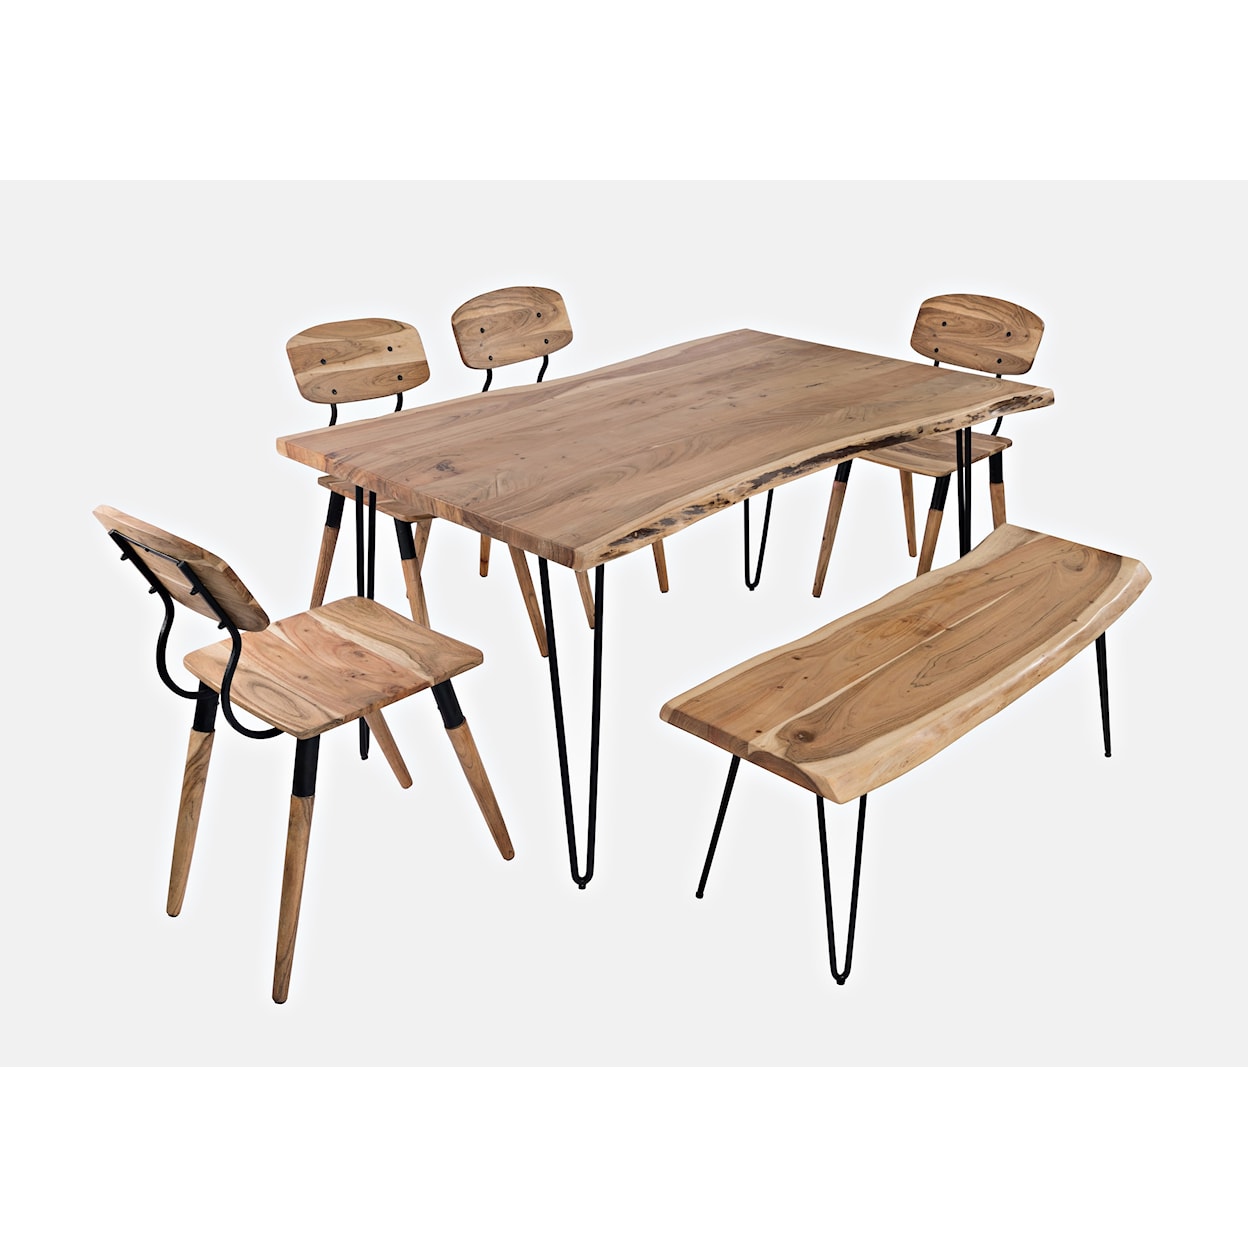 Jofran Nature's Edge 60" Dining Table with 4 Chairs and Bench